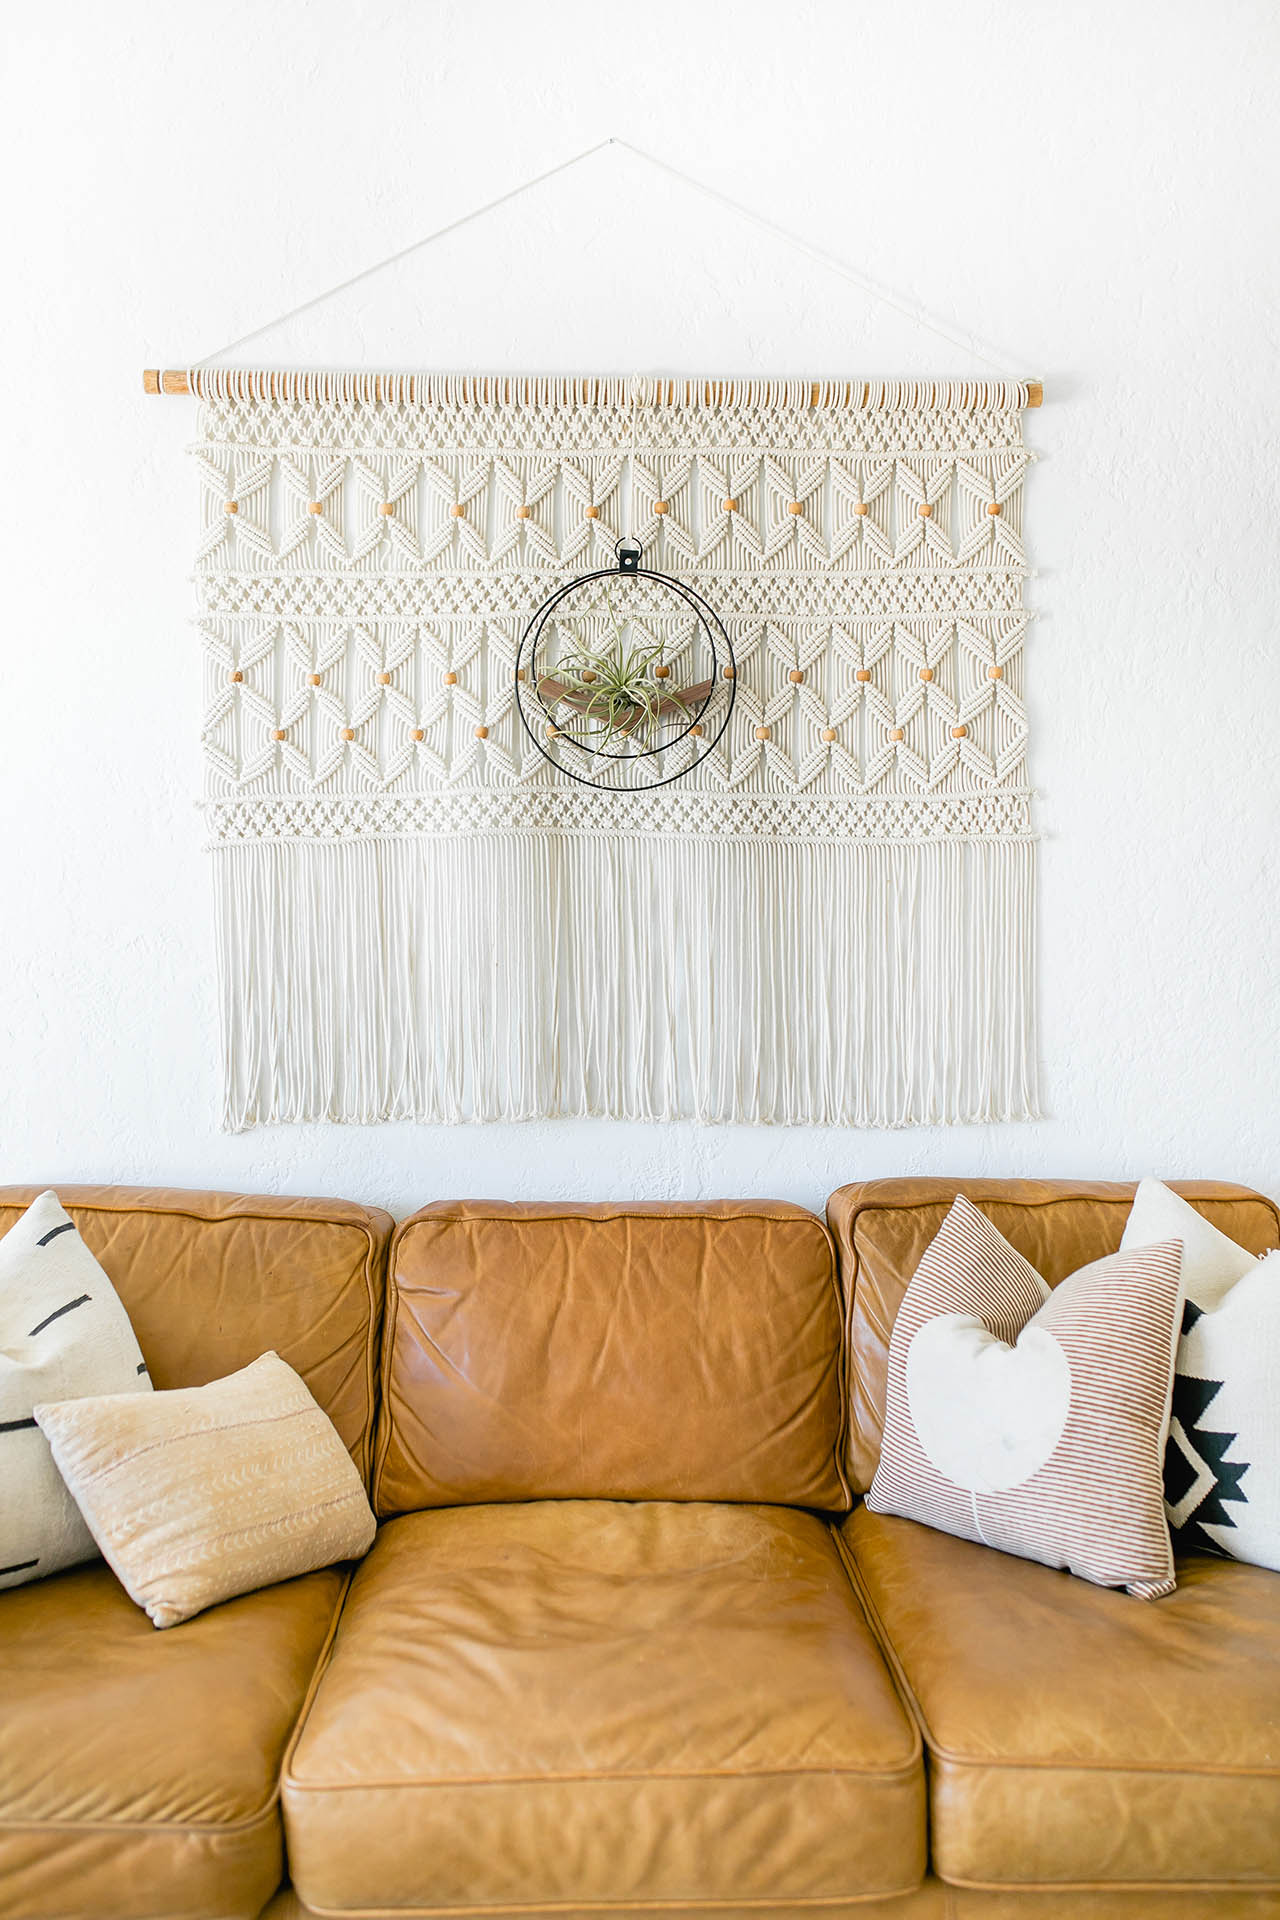 wall mounted air plant holder by braid & wood styled on macrame tapestry above tan leather couch